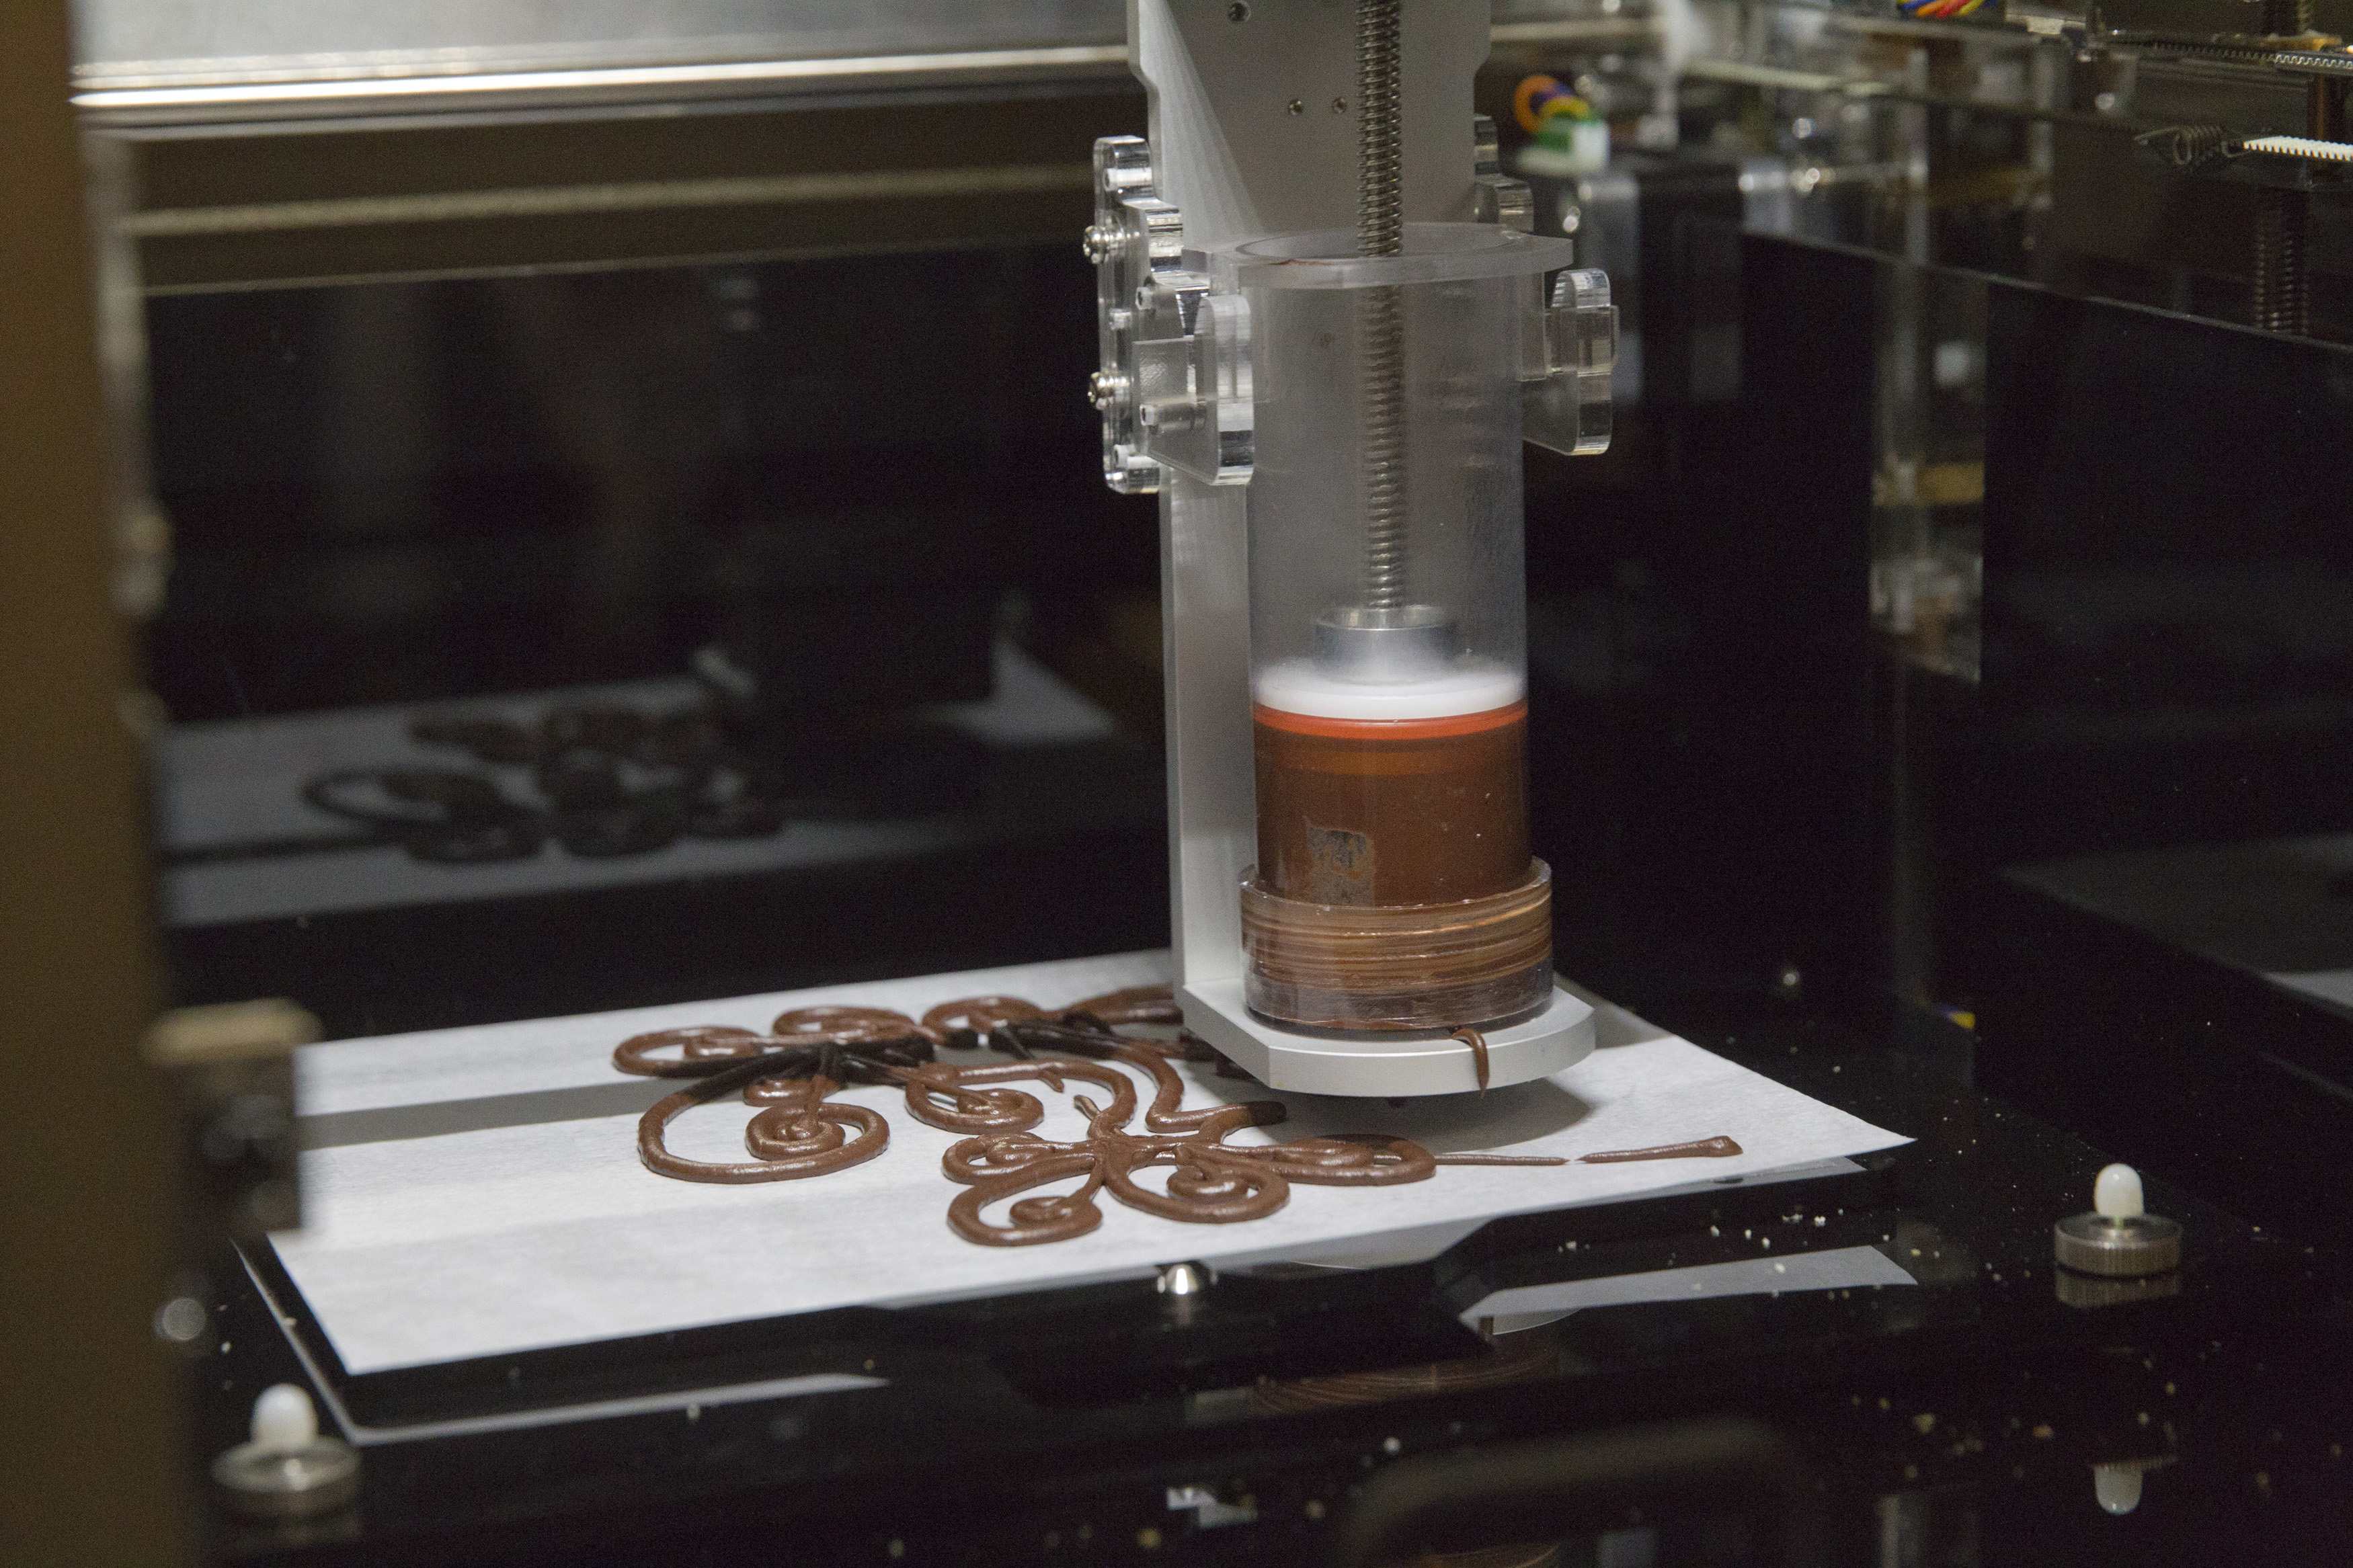 A 3D food printer by XYZprinting Inc. is demonstrated during the 2015 International Consumer Electronics Show (CES) in Las Vegas, Nevada January 4, 2015. The printer is expected to be available in the third quarter of 2015 but a price has not yet been established, a representative said. REUTERS/Steve Marcus (UNITED STATES - Tags: SCIENCE TECHNOLOGY BUSINESS FOOD)